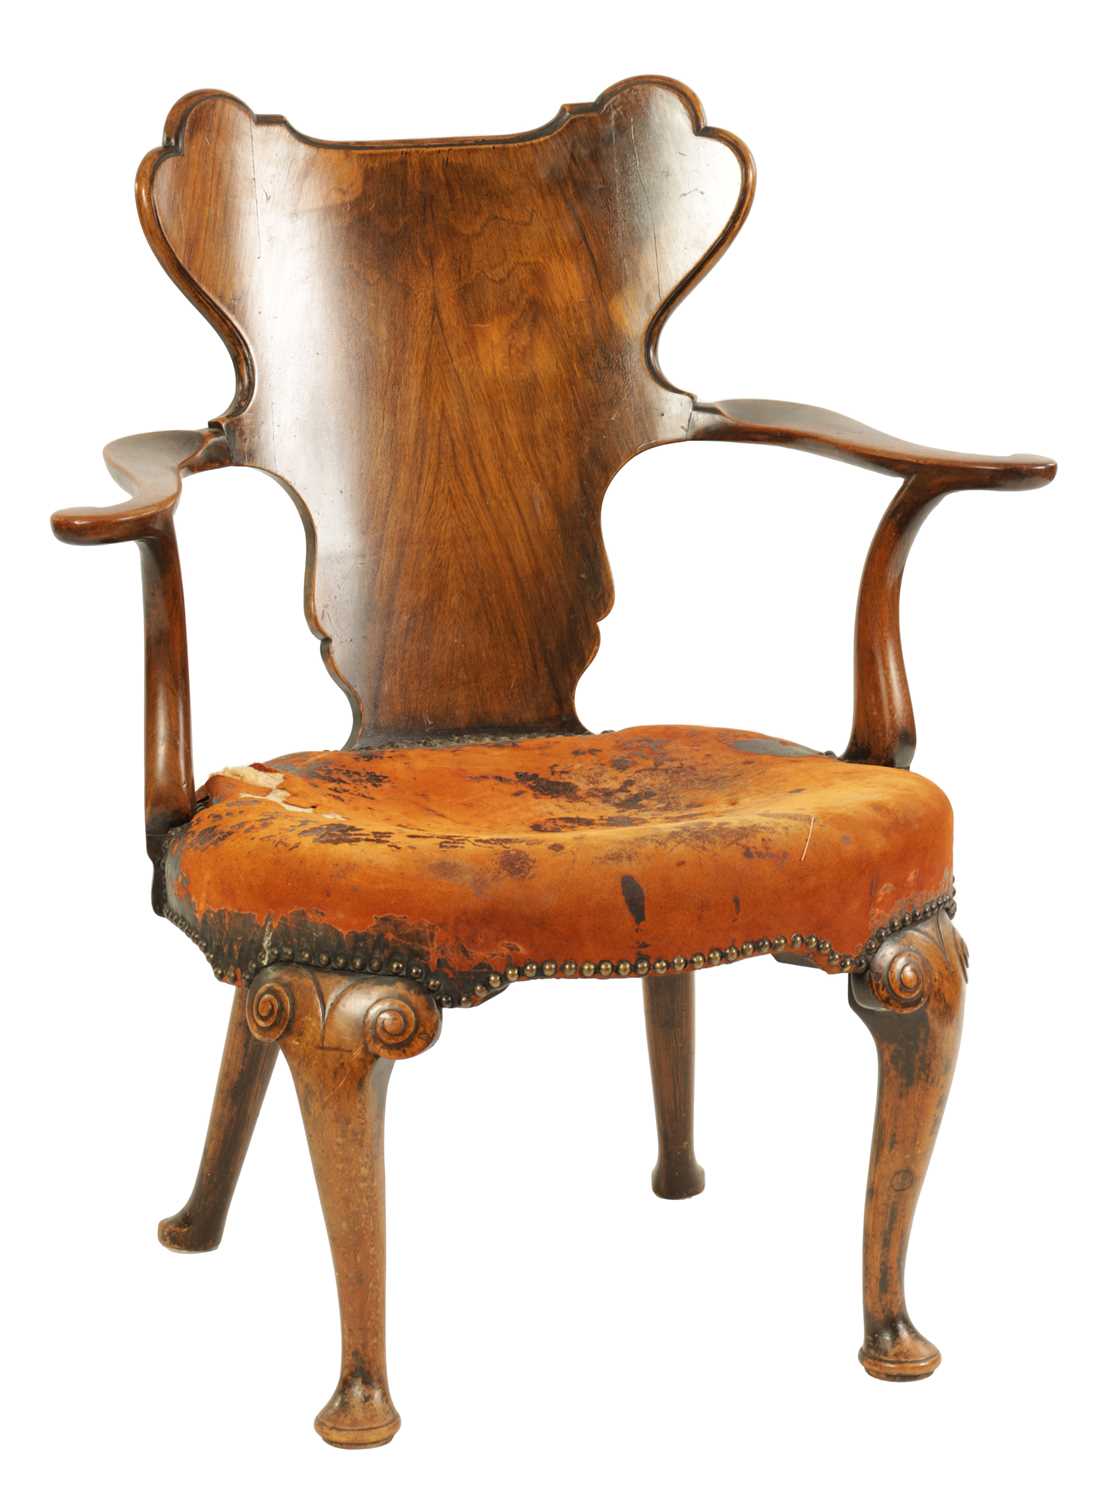 AN EARLY 20TH CENTURY WALNUT OPEN ARMCHAIR IN THE MANER OF GILLOWS